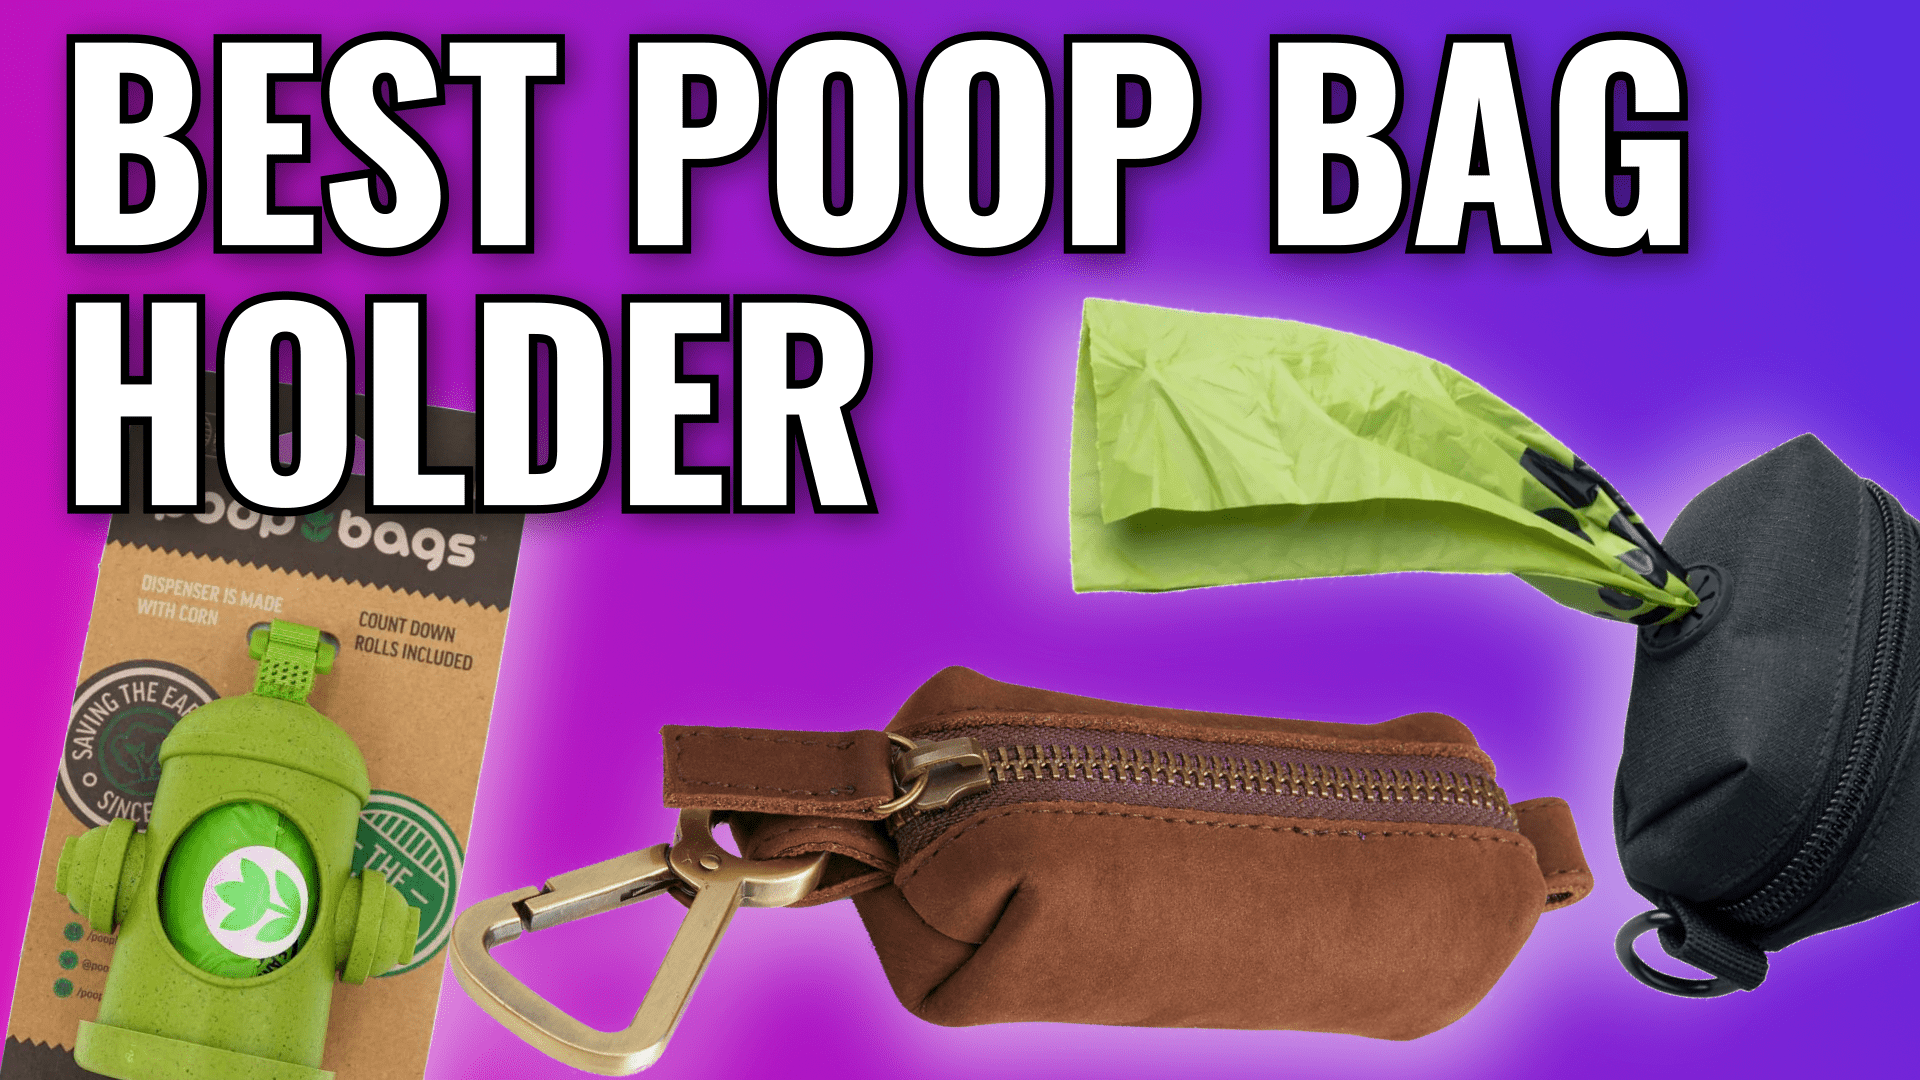 Our Tik Tok Shop is now open Our used poop bag holder is perfect for